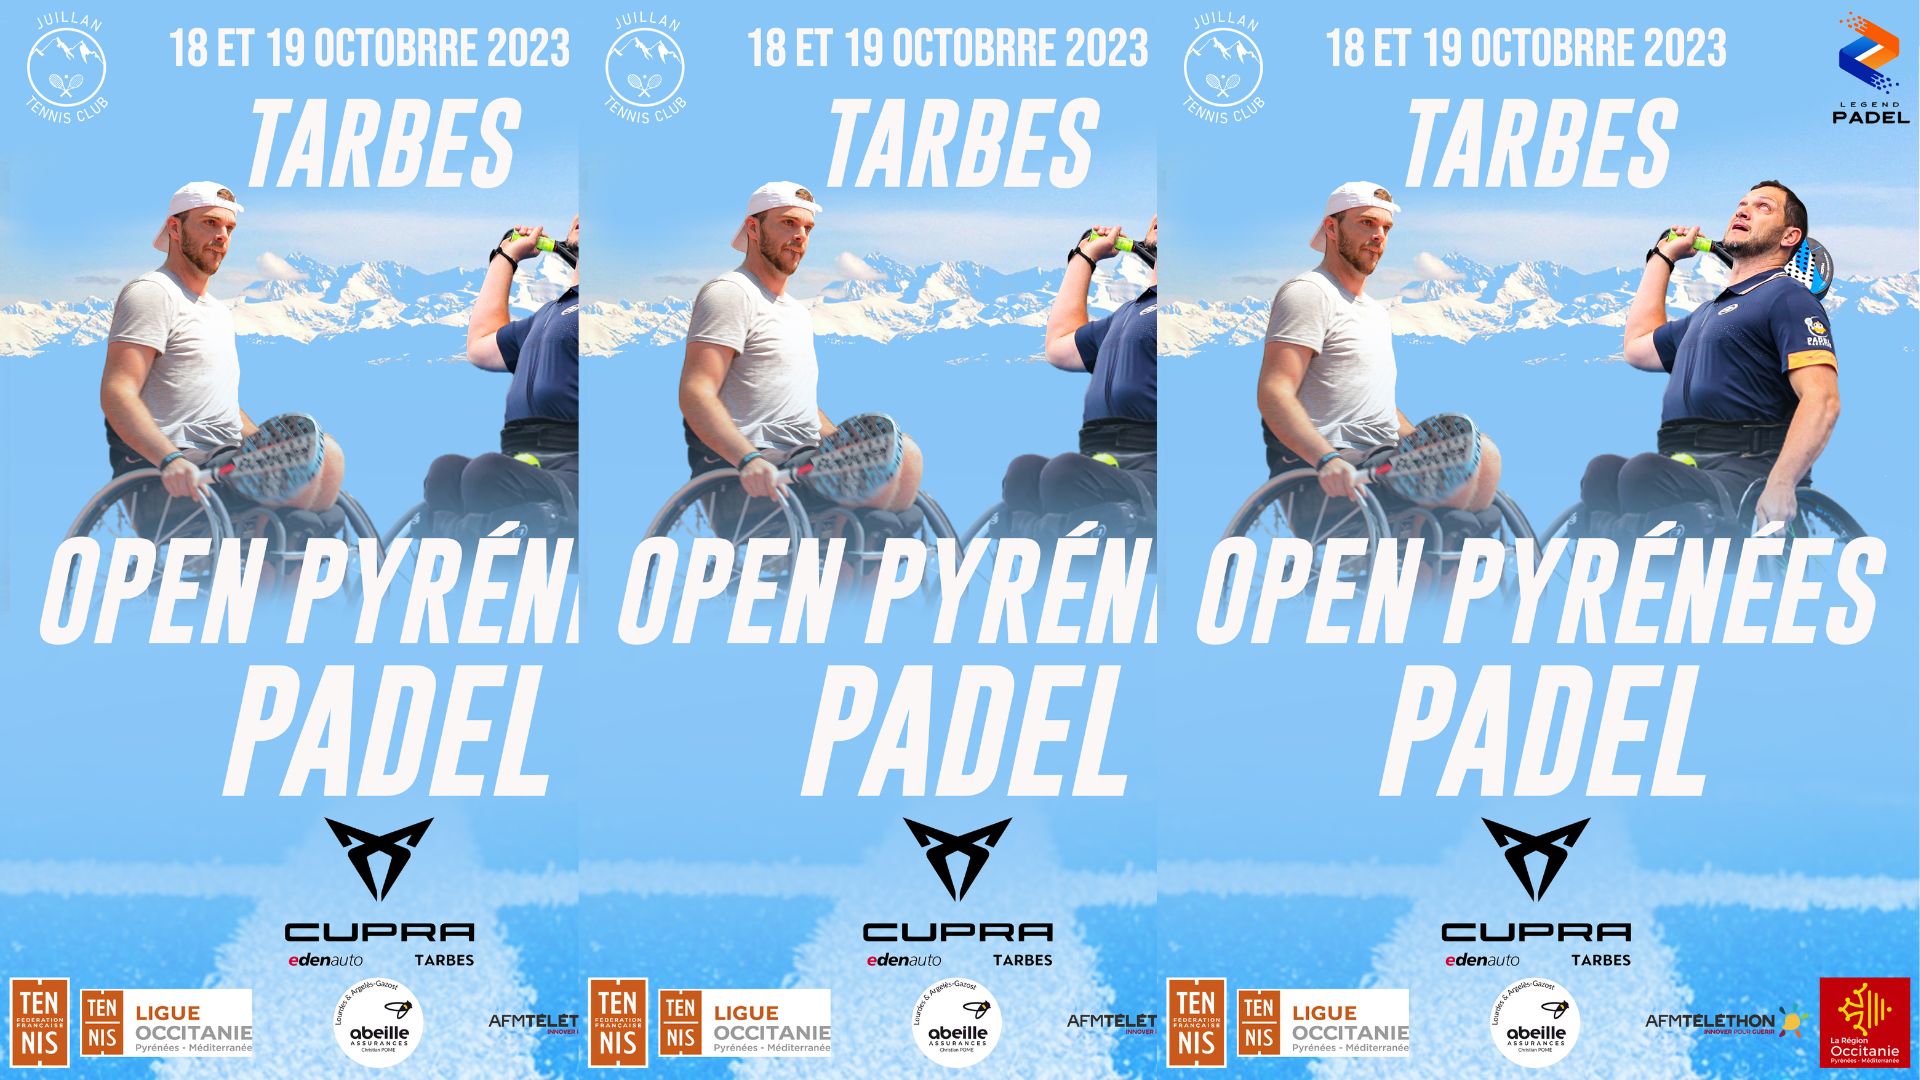 A tournament padel-very high level armchair in Tarbes mid-October!